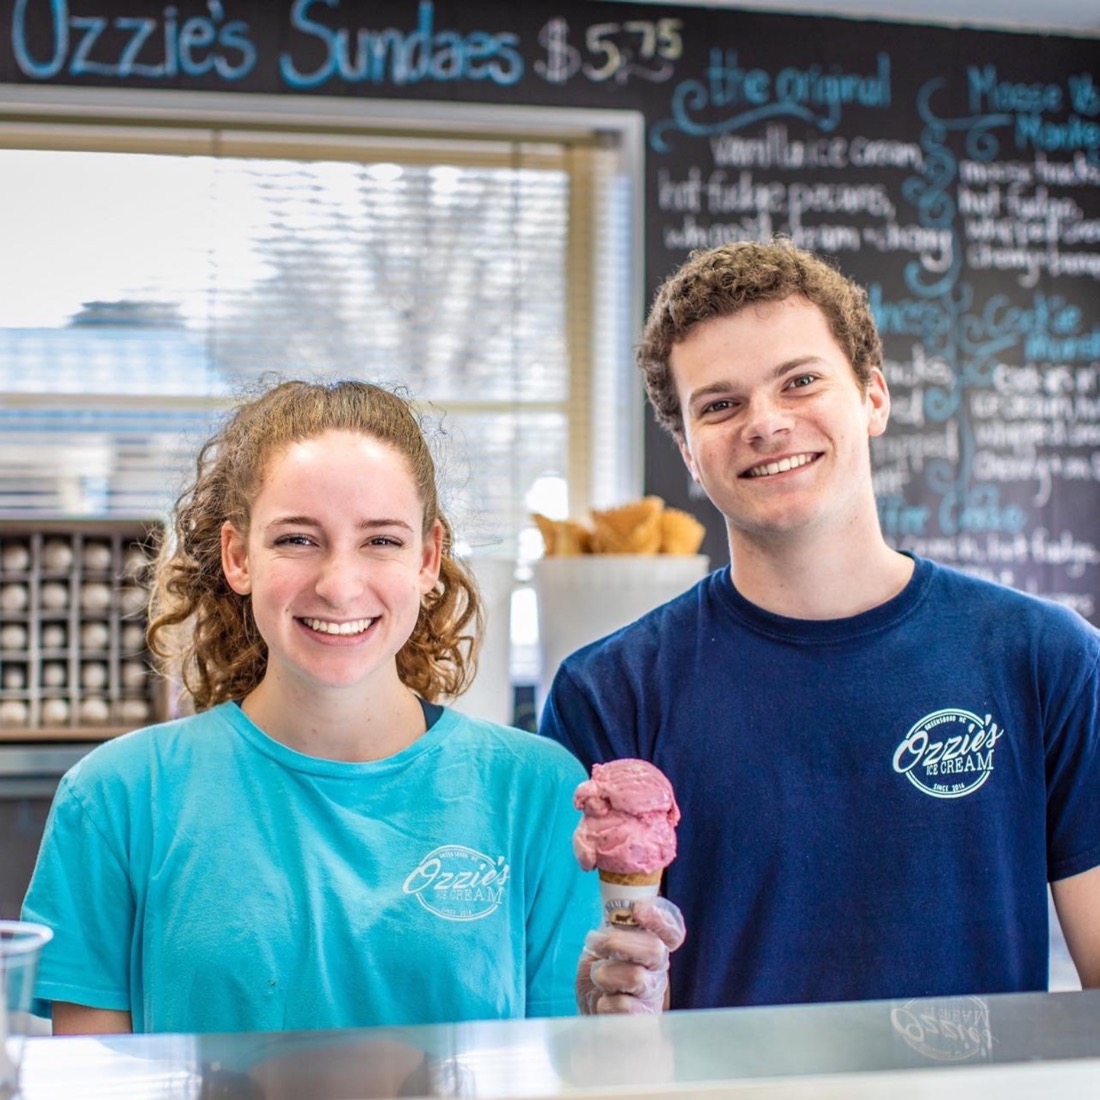 Close up photo of two smiling workers in an ice cream shop.